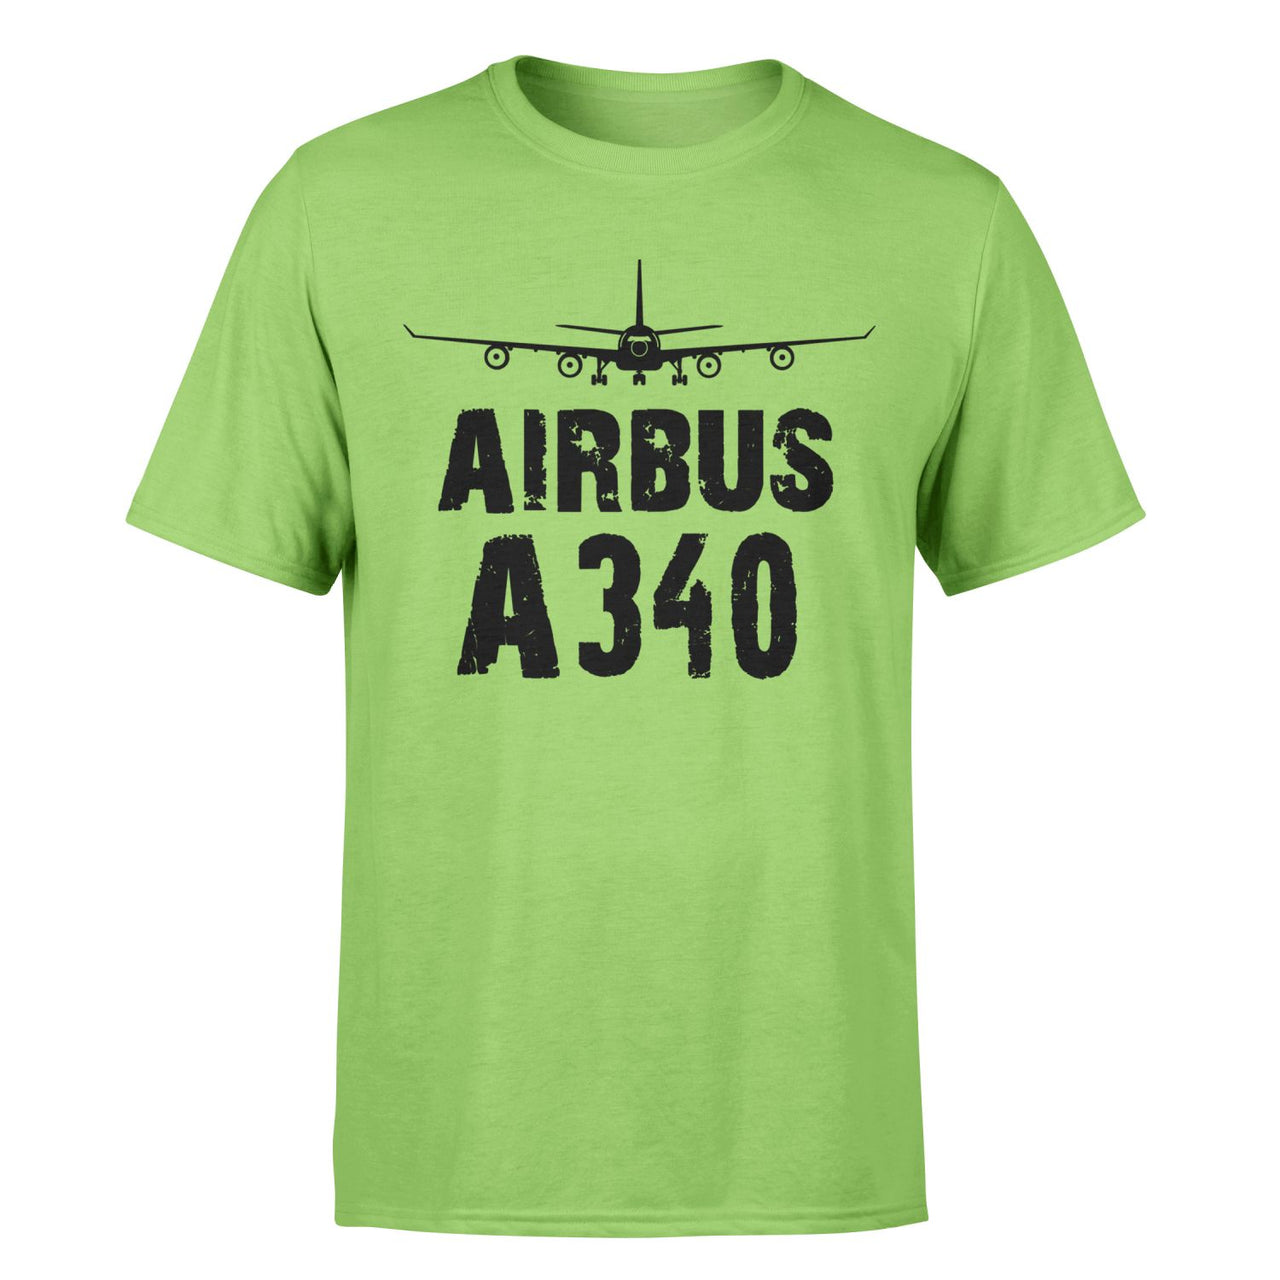 Airbus A340 & Plane Designed T-Shirts